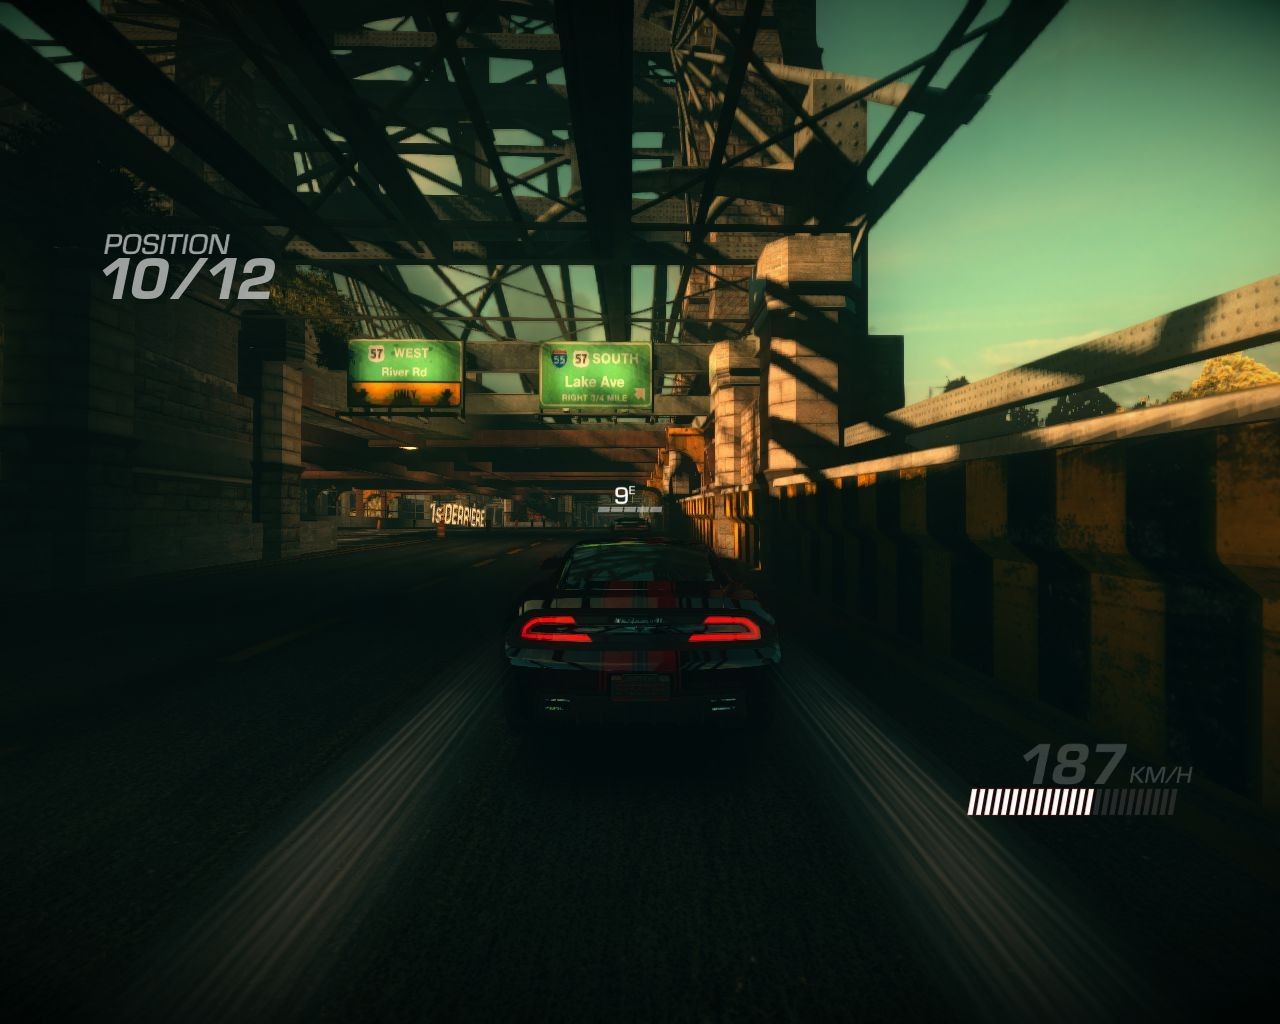 ridge racer unbounded is one of the hardest games ive played